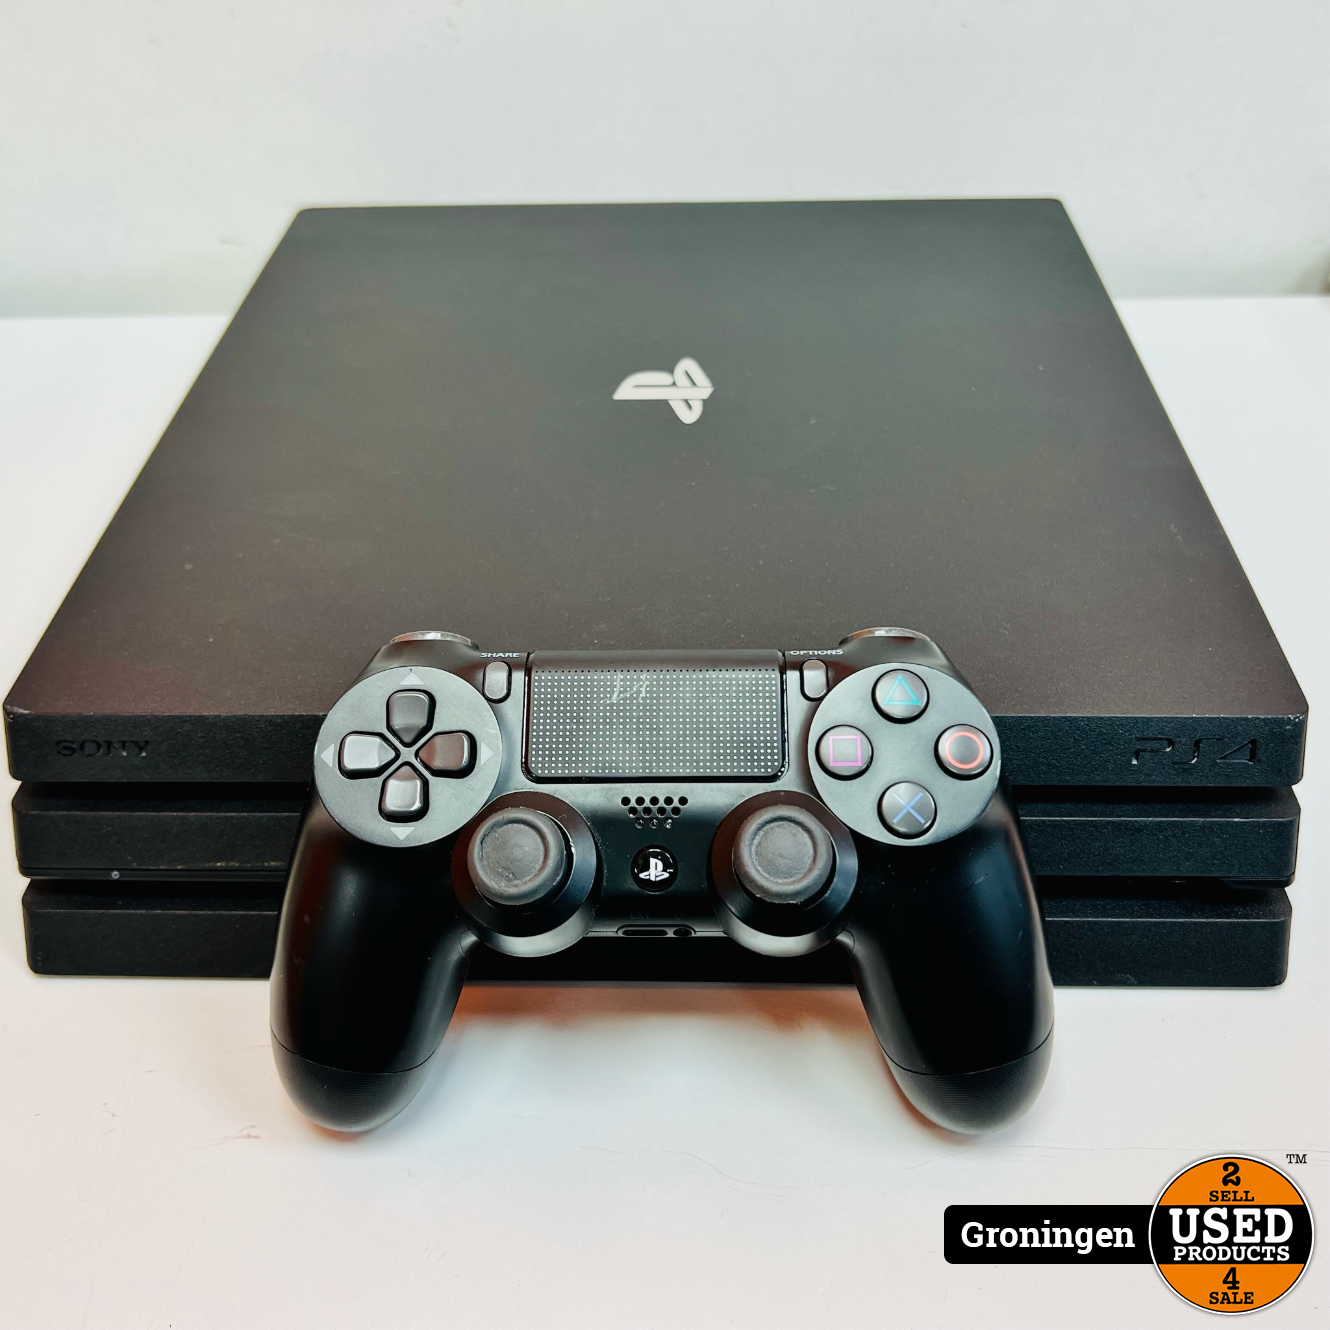 PS4] Sony PlayStation 4 PRO 1TB Zwart CUH-7216B incl. Sony DualShock V2 Controller - Used Products